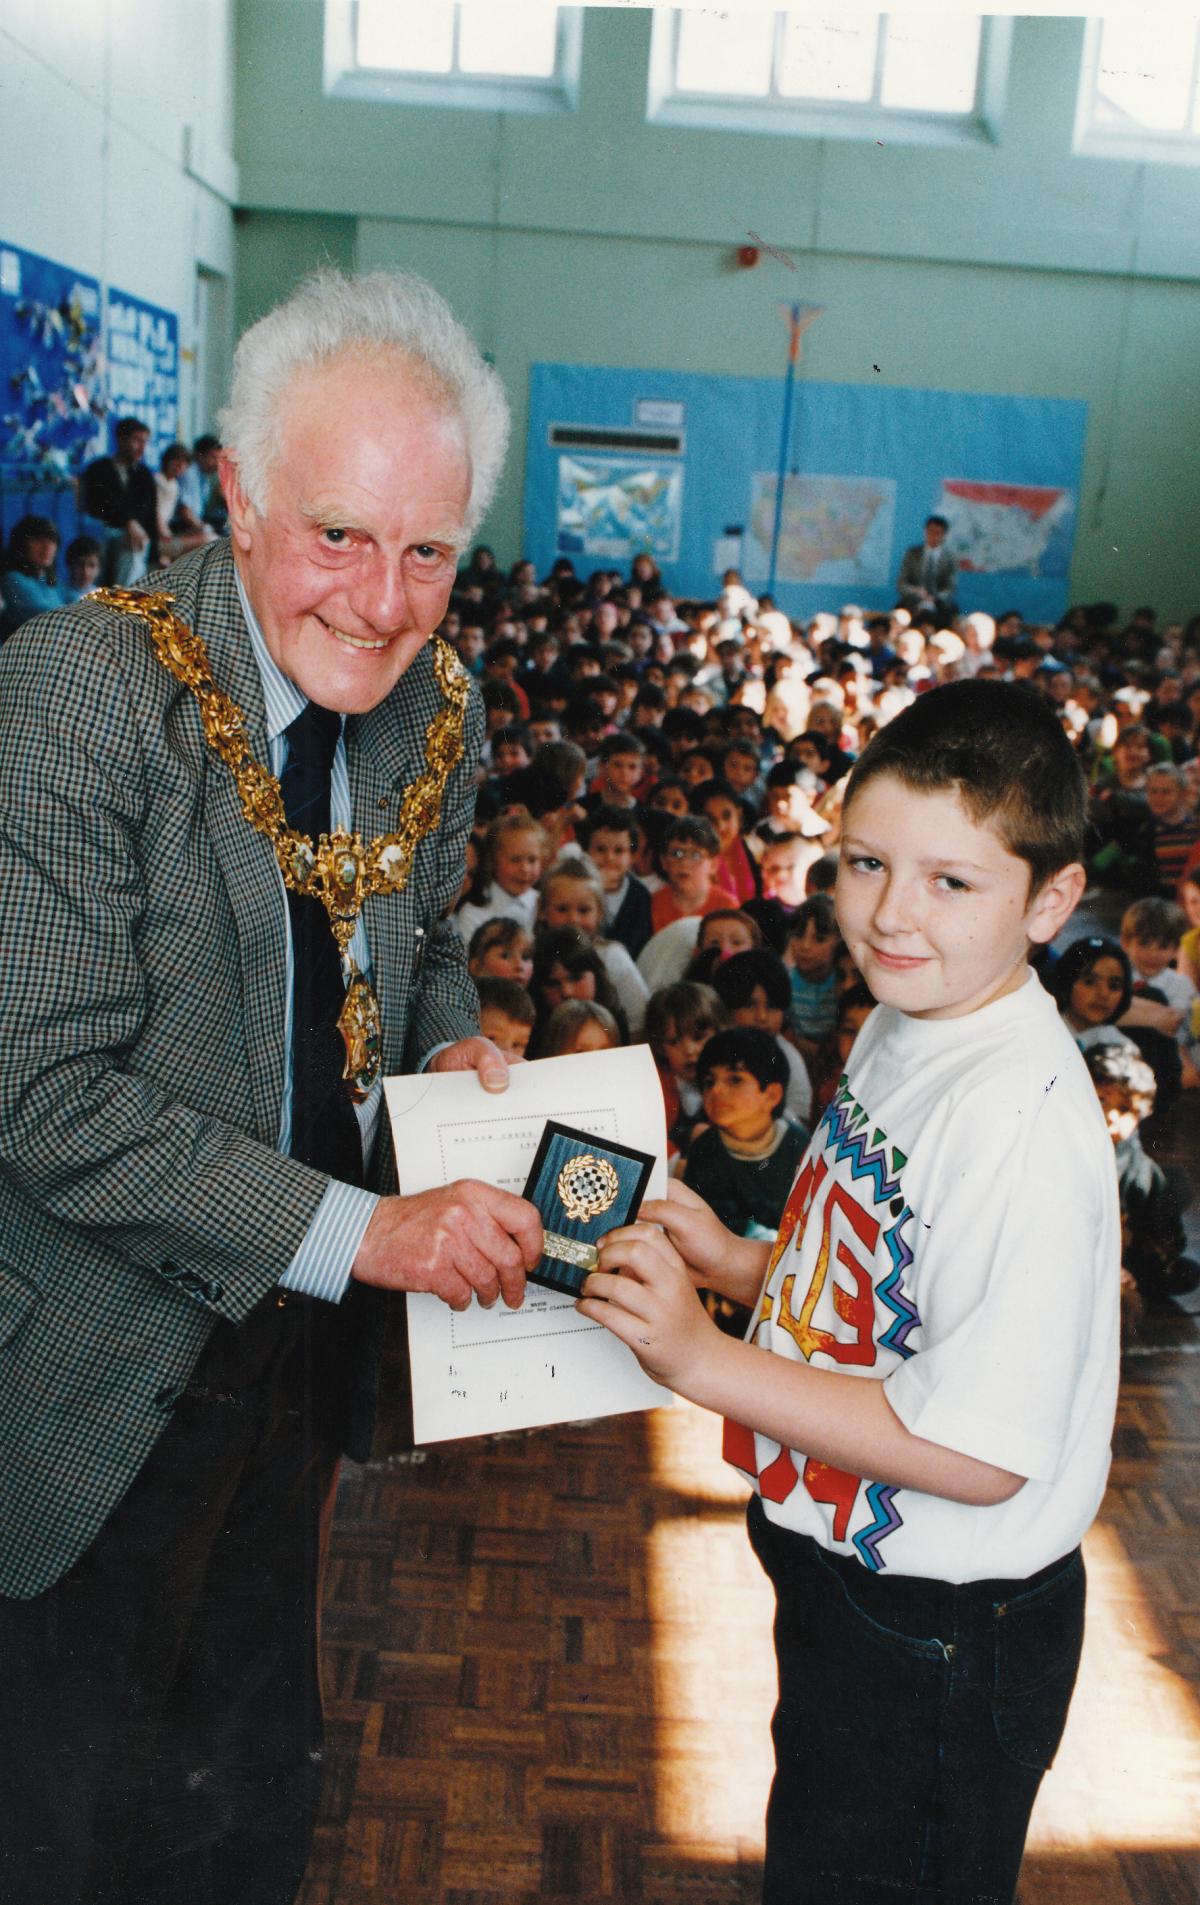 Mayor of Pendle Roy Clarkson presents a plaque to Lee Hopson as winner of Walton Chess competition